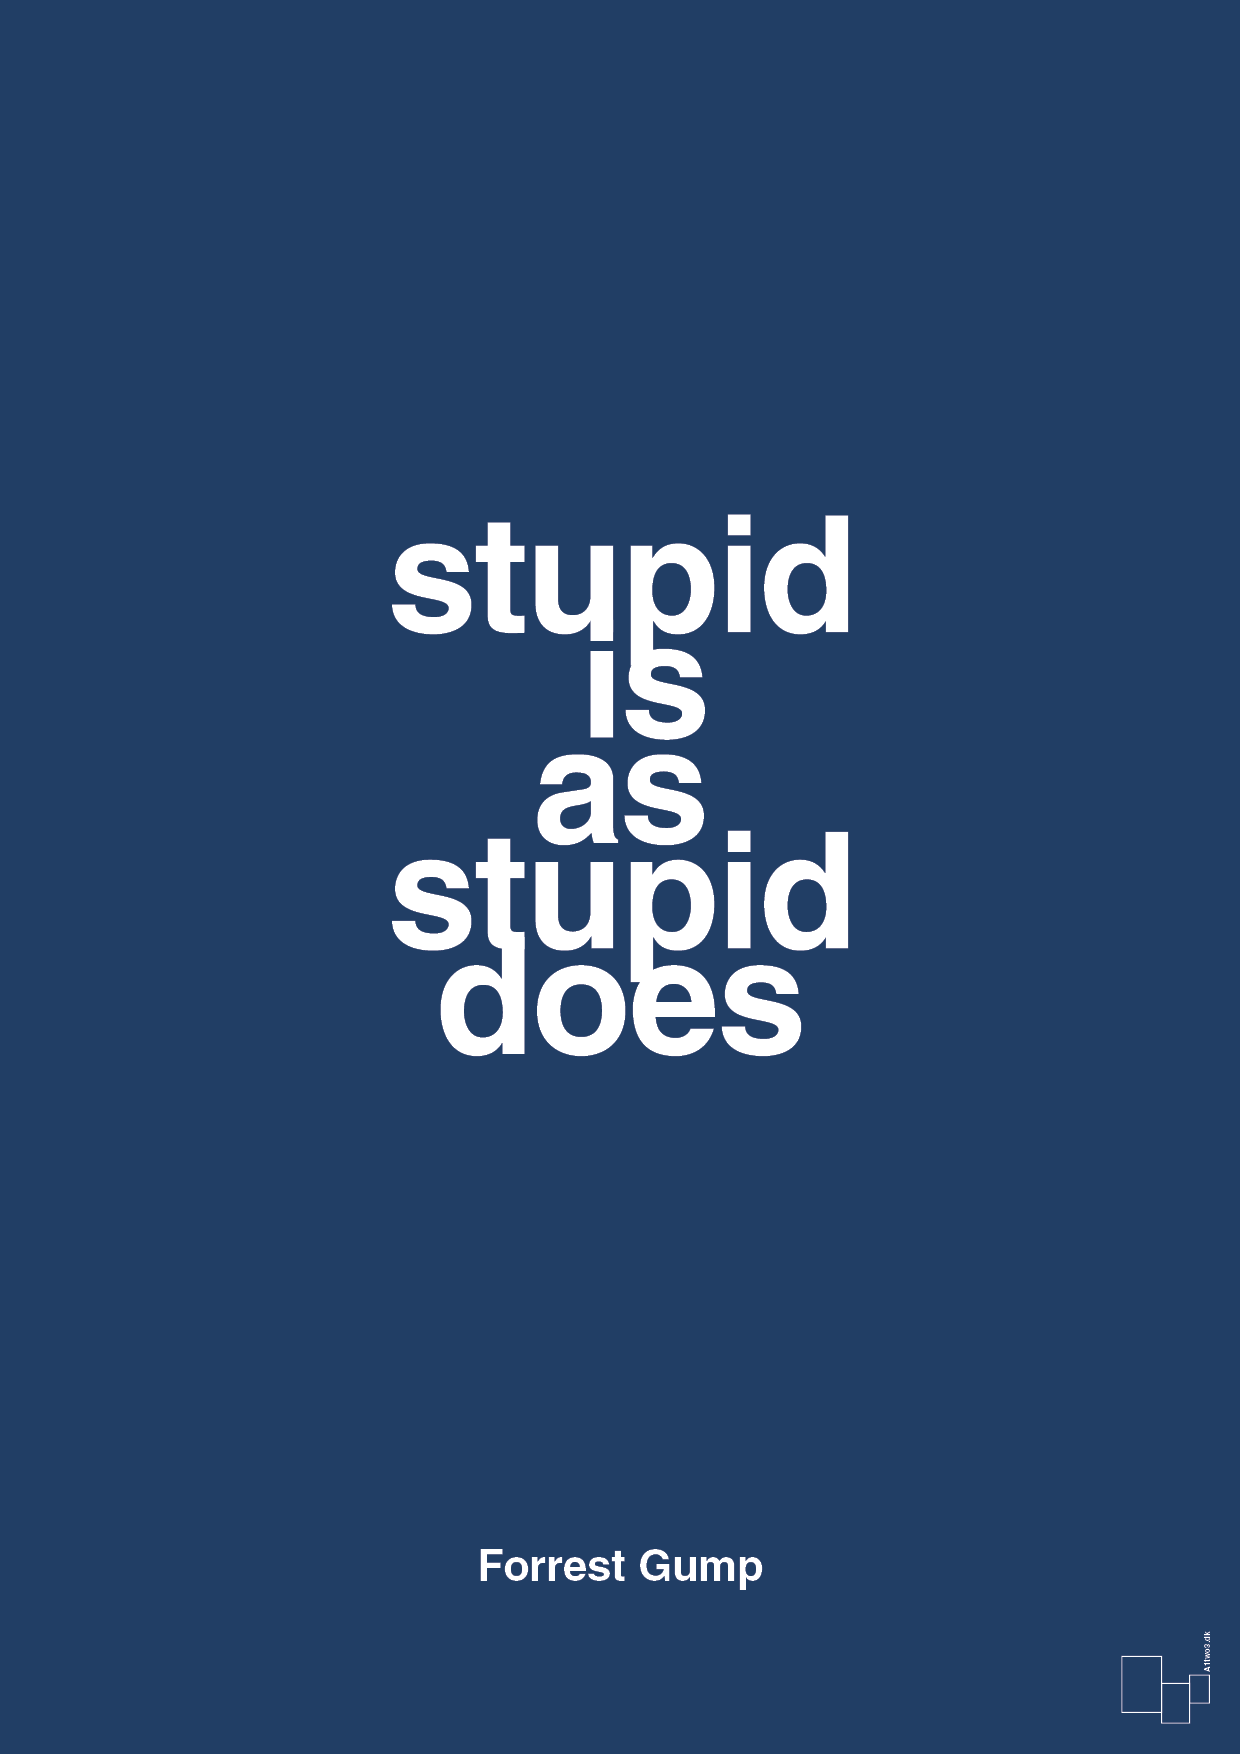 stupid is as stupid does - Plakat med Citater i Lapis Blue